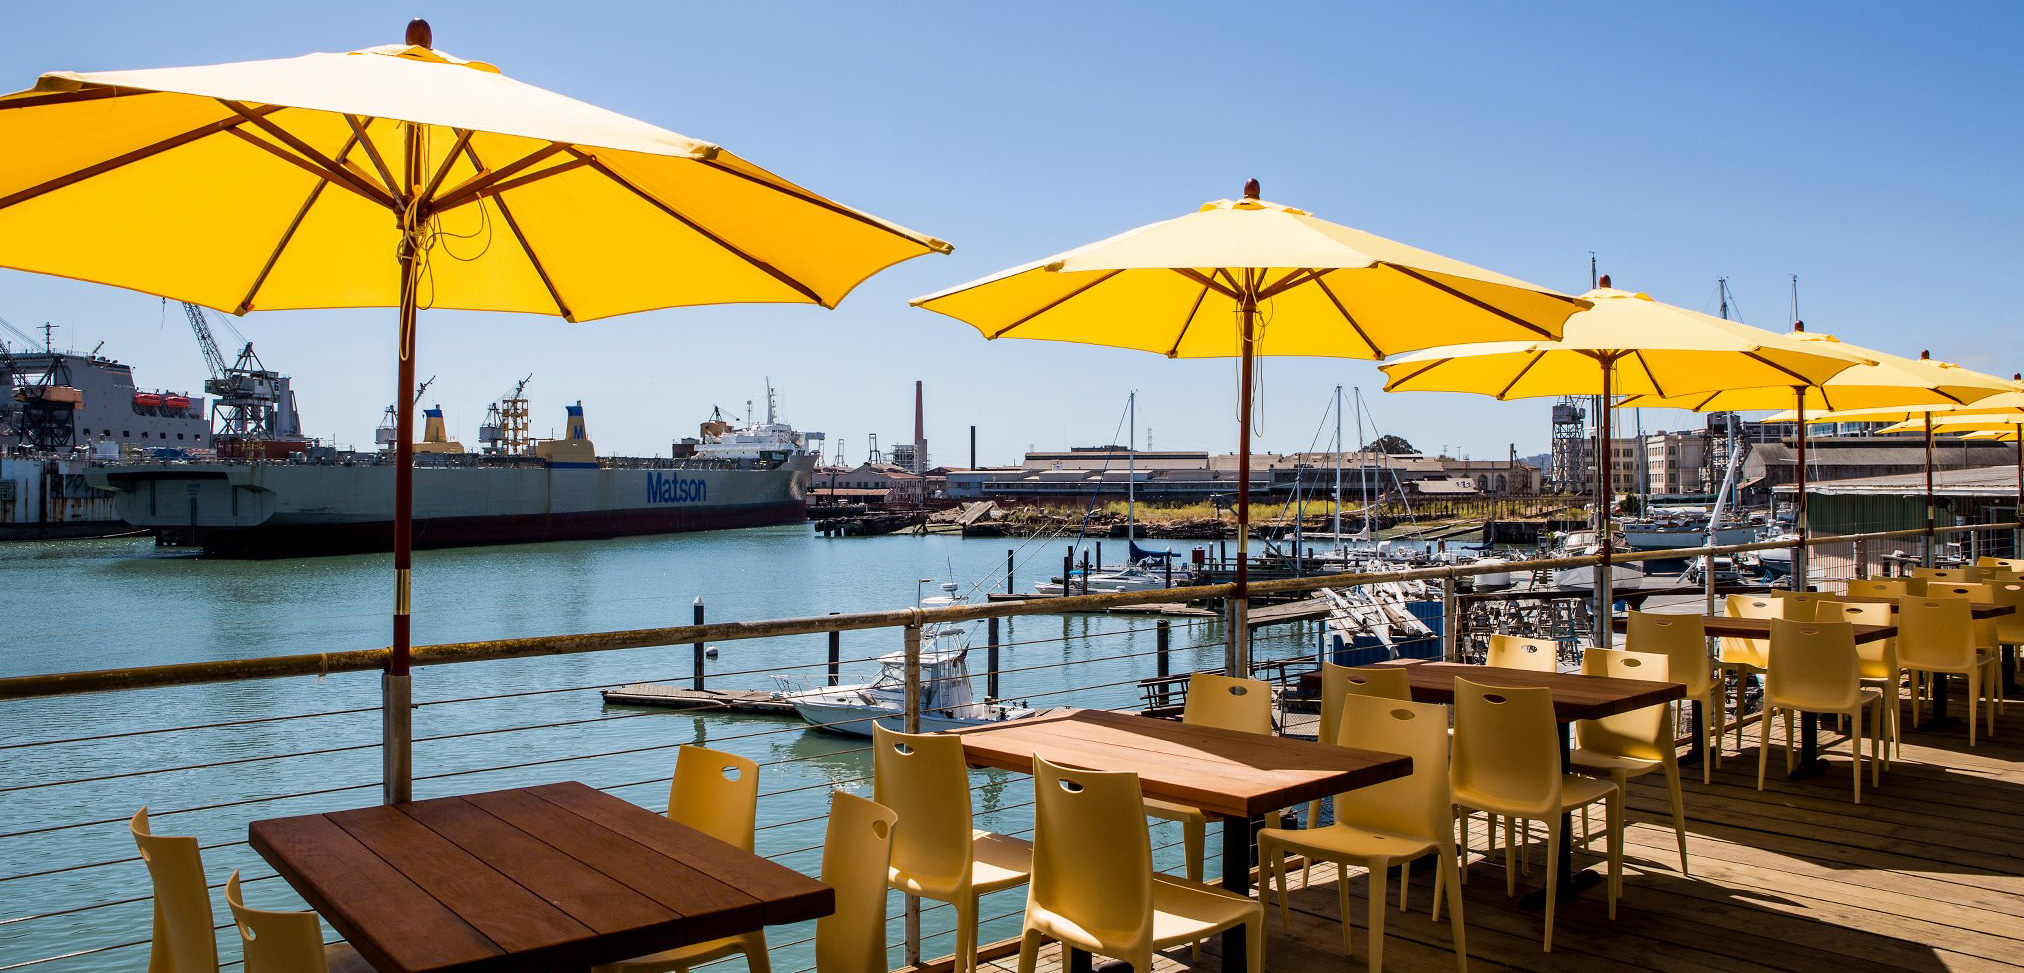 Waterfront Restaurants With a View in San Francisco - SF Station - San